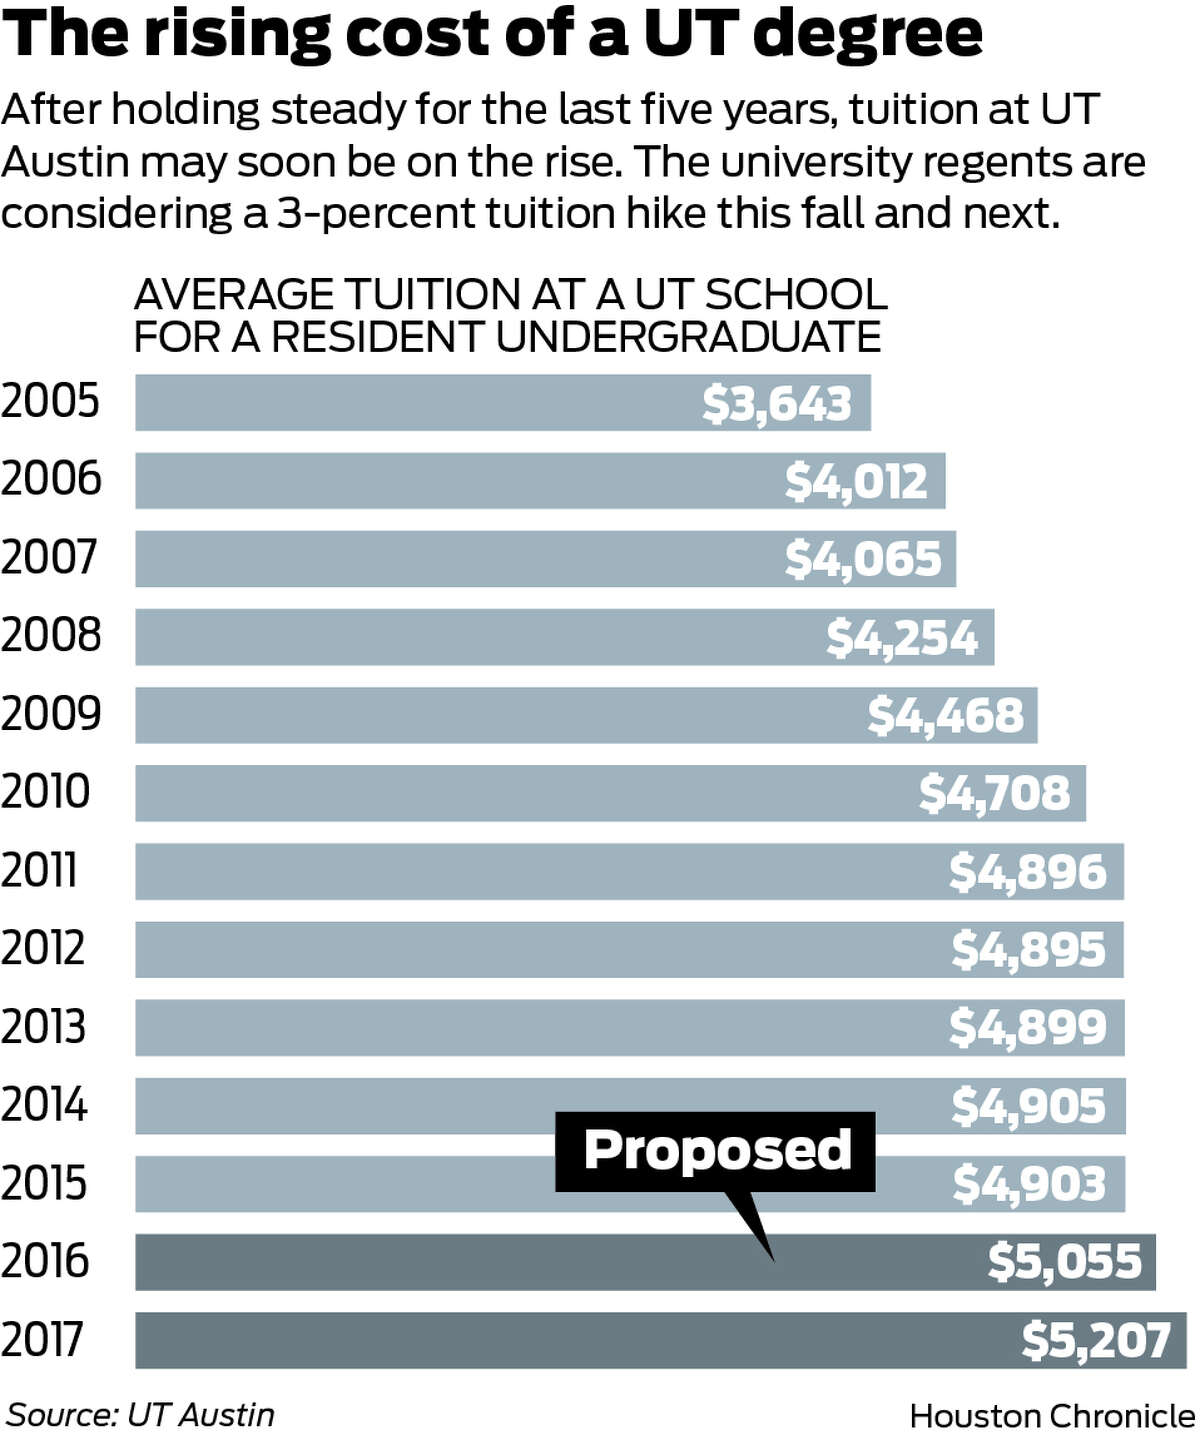 ut-regents-to-discuss-tuition-increase-at-flagship